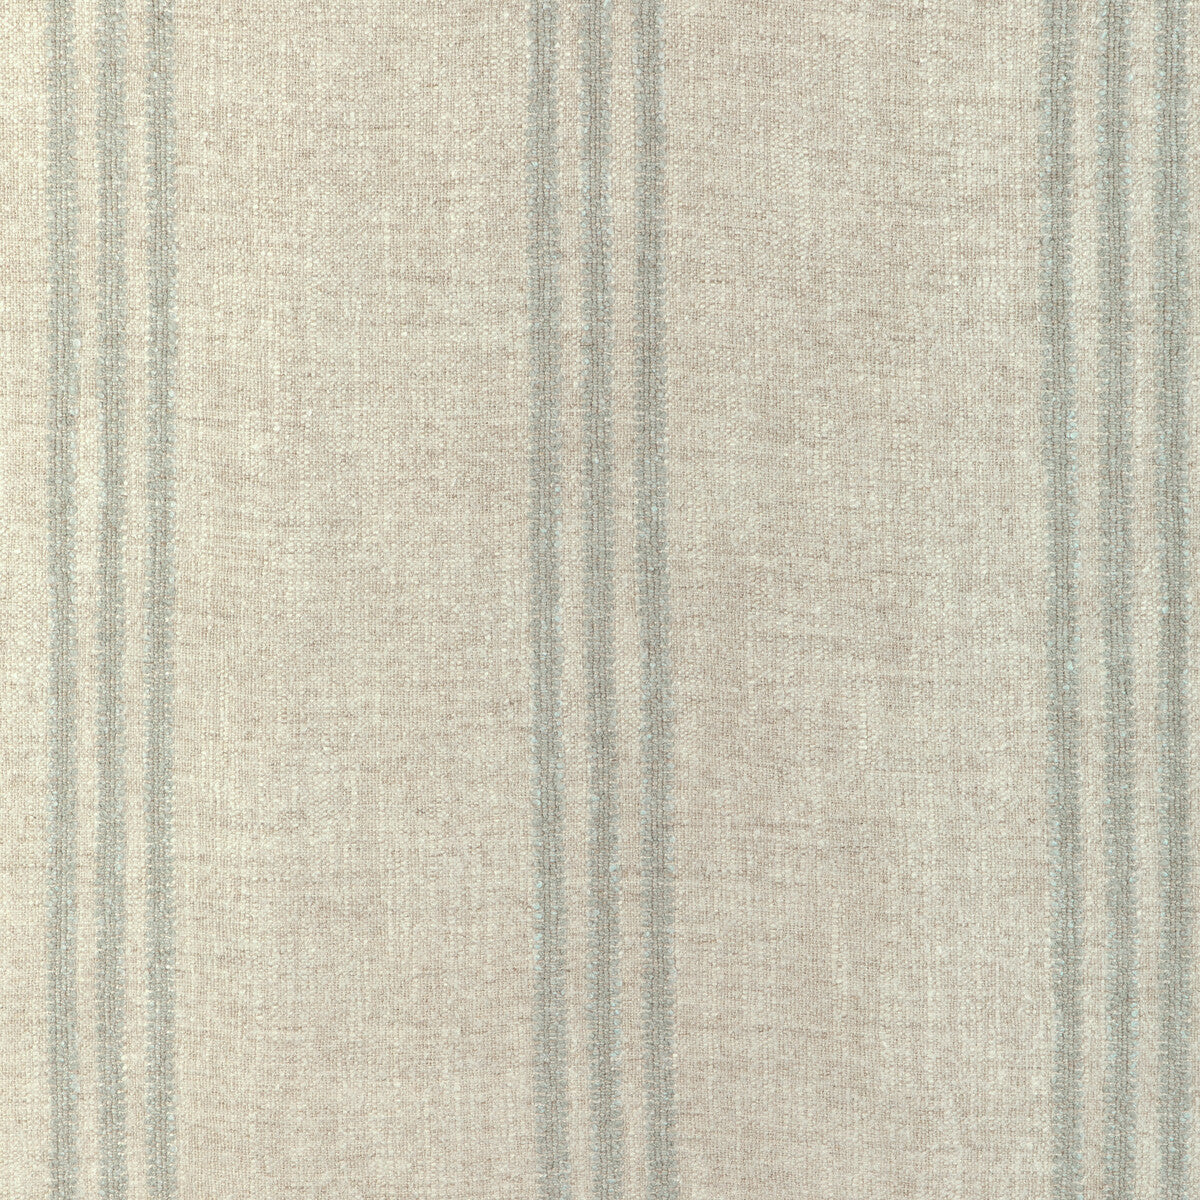 Karphi Stripe fabric in mist color - pattern 35860.1615.0 - by Kravet Couture in the Atelier Weaves collection